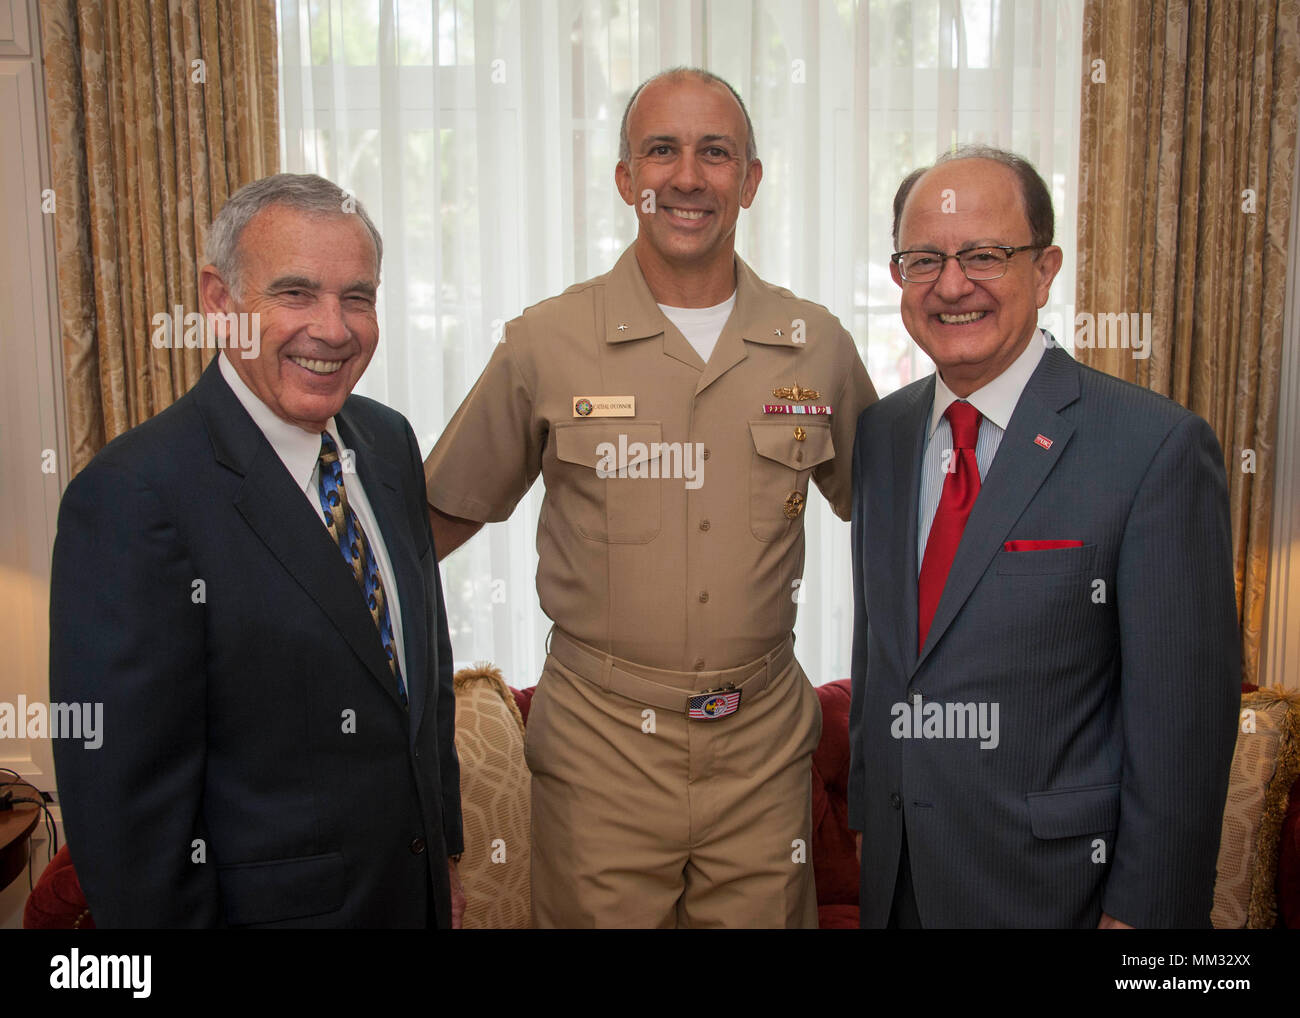 LOS ANGELES (Sept. 1, 2017) (from left to right) Edward P. Roski Jr., University of Southern California's chairman of the board, Rear Adm. Cathal S. O’Connor, commander, Expeditionary Strike Group THREE, and Dr. C. L. Max Nikias, president of the University of Southern California, pose for a photo during a meeting held in conjunction with the second annual Los Angeles Fleet Week. LA Fleet Week is an opportunity for the American public to meet their Navy, Marine Corps and Coast Guard team and experience America's sea services. During fleet week, service members will participate in various commu Stock Photo